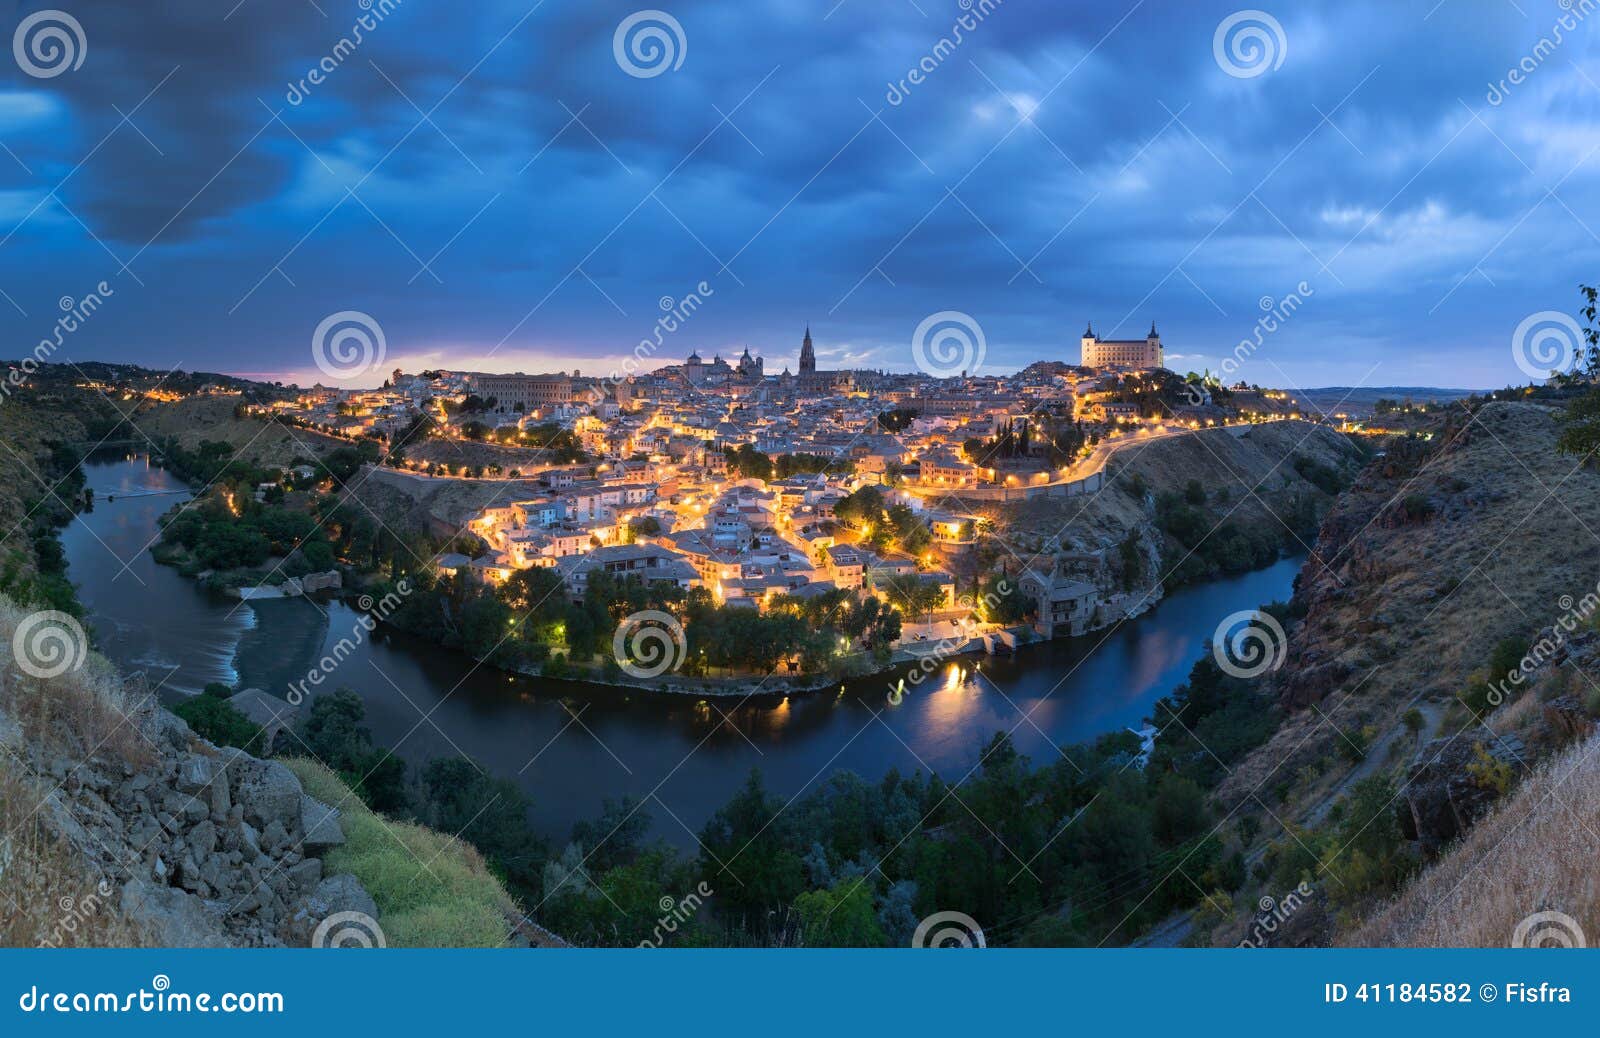 panoramic view of toledo after sunset, spain